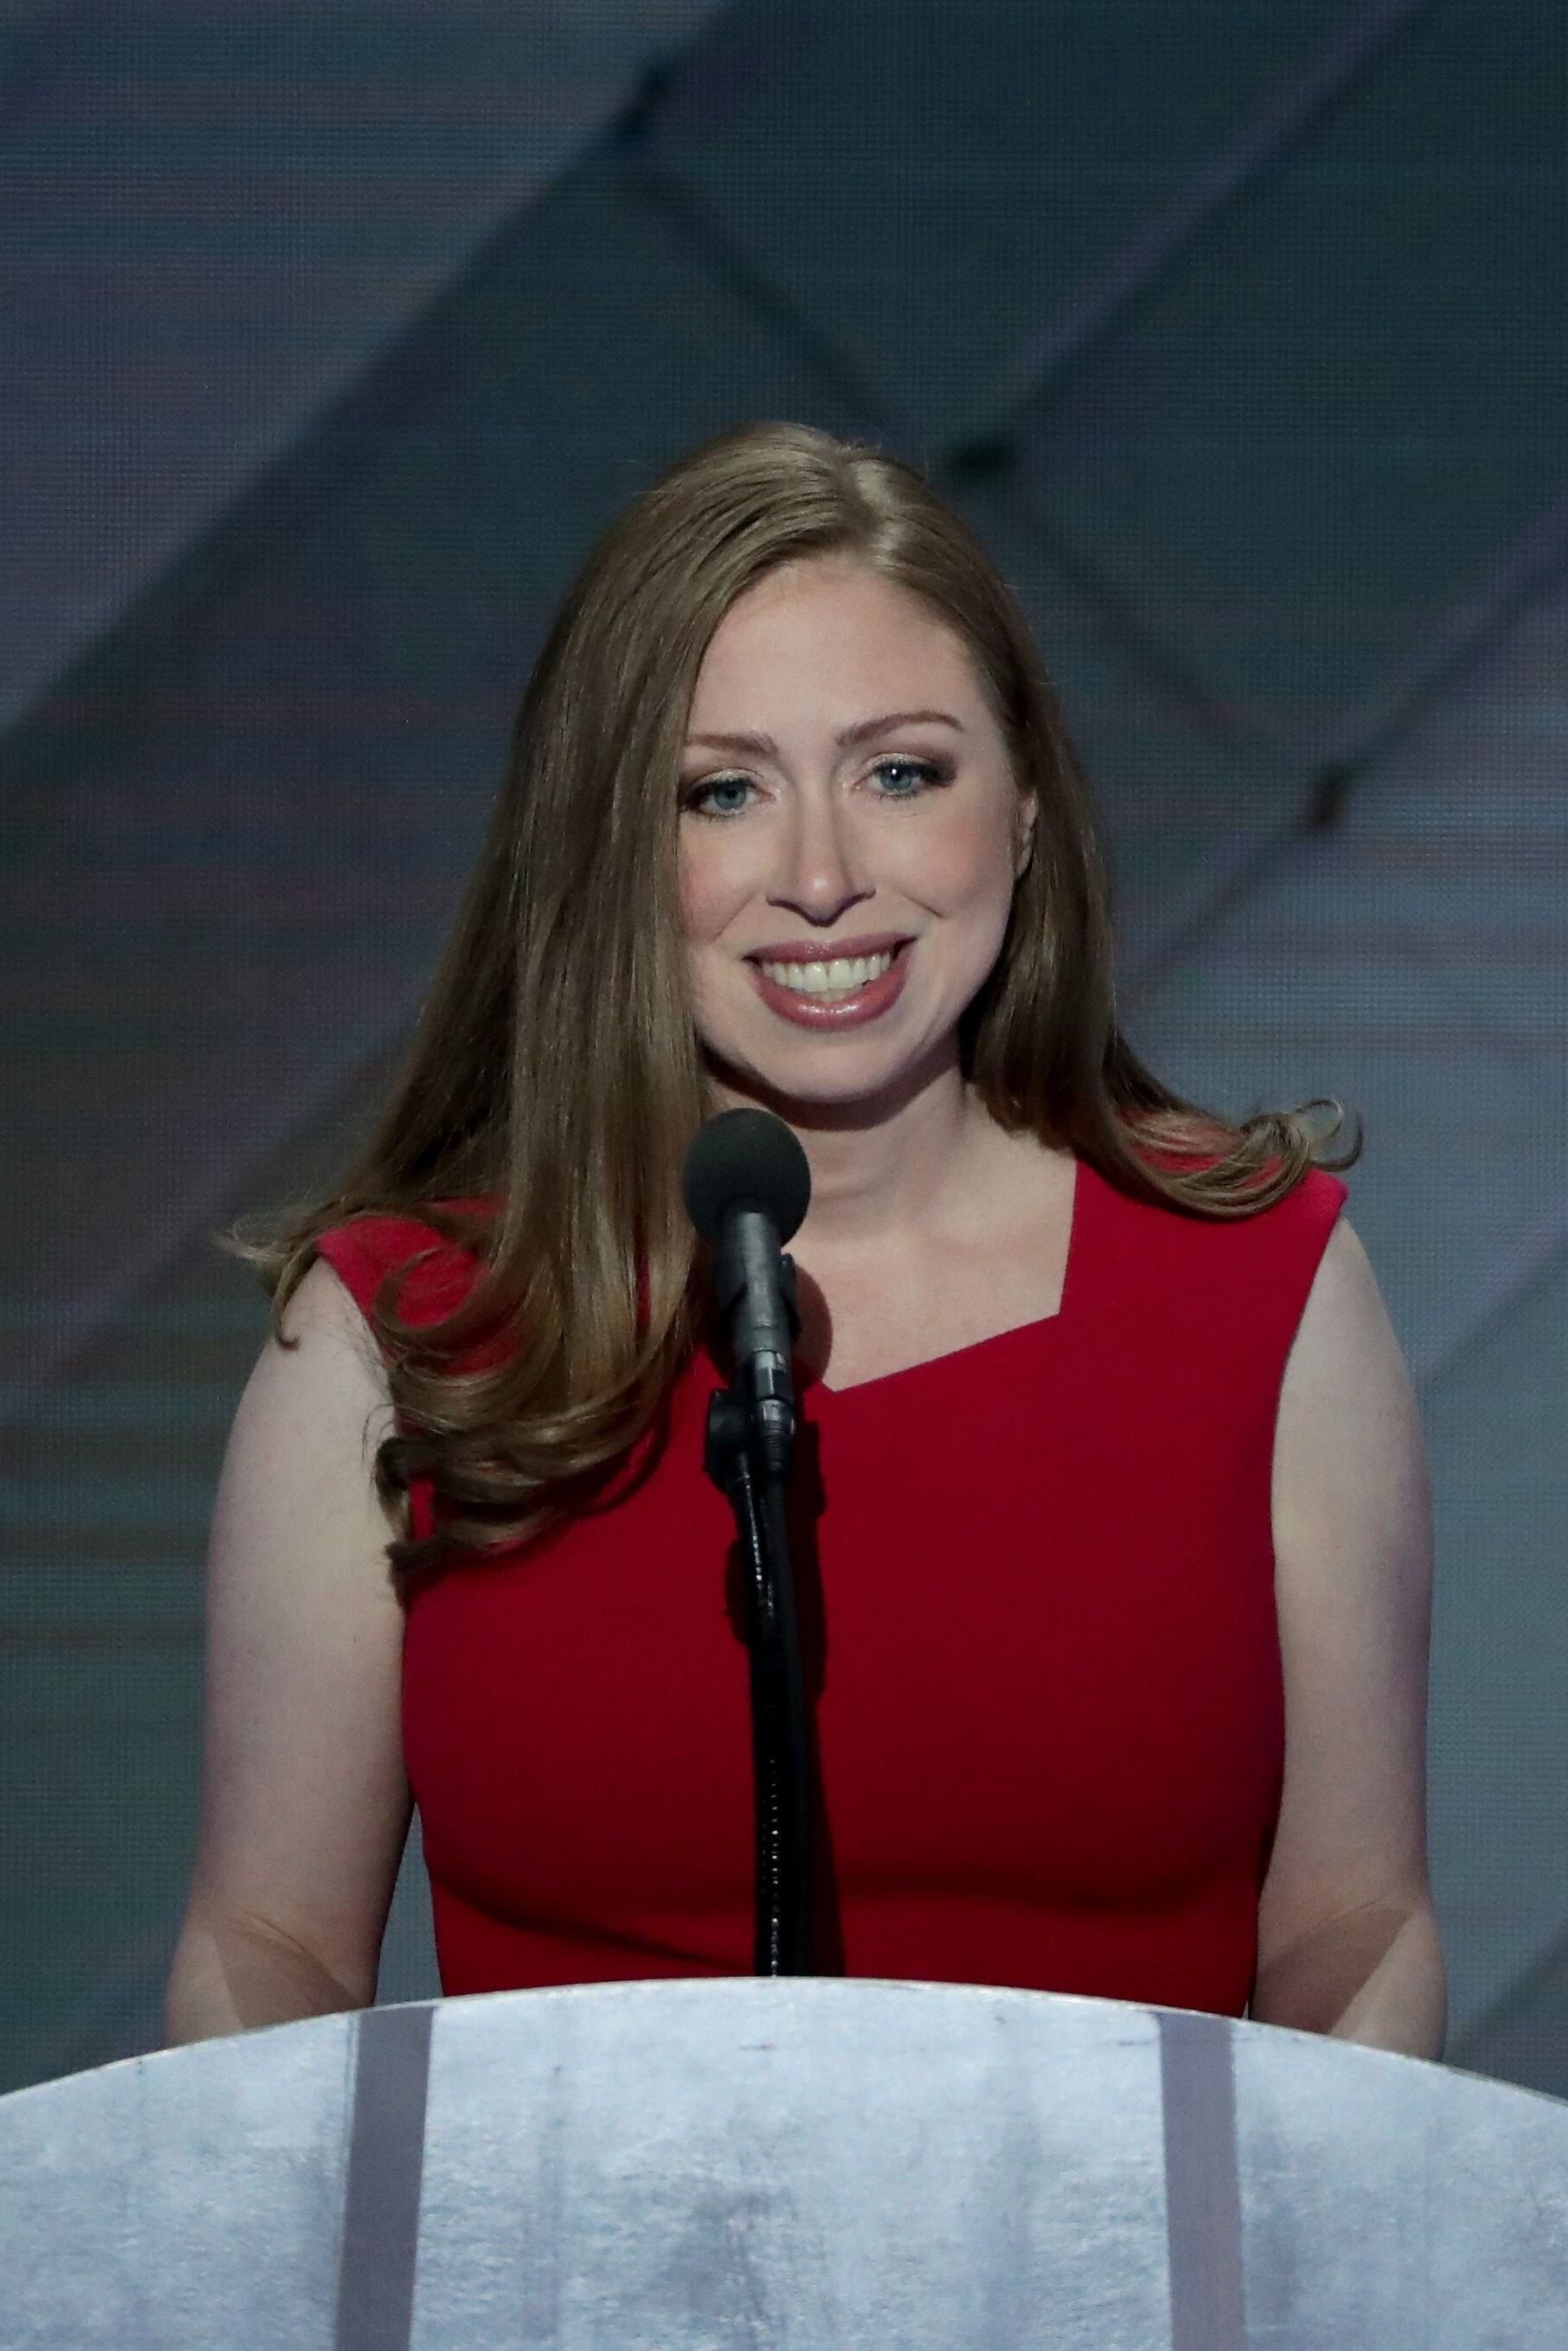 Chelsea Clinton introduces her mother, Democratic presidential nominee Hillary Clinton in Wells Fargo in 2016 | Source: Getty Images